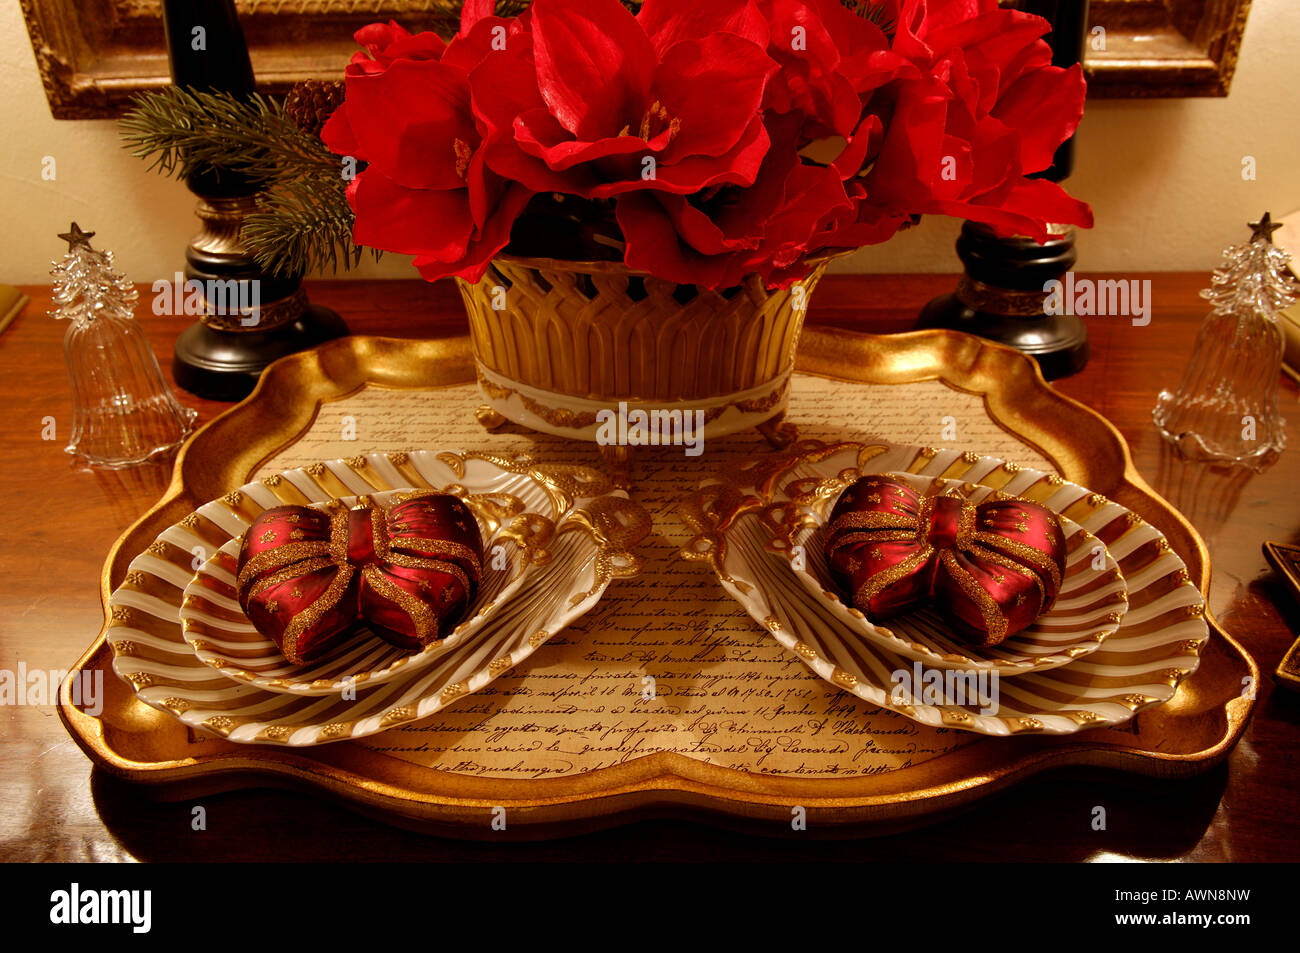 Christmas decorations on a tray with red artificial flowers in vase Stock Photo